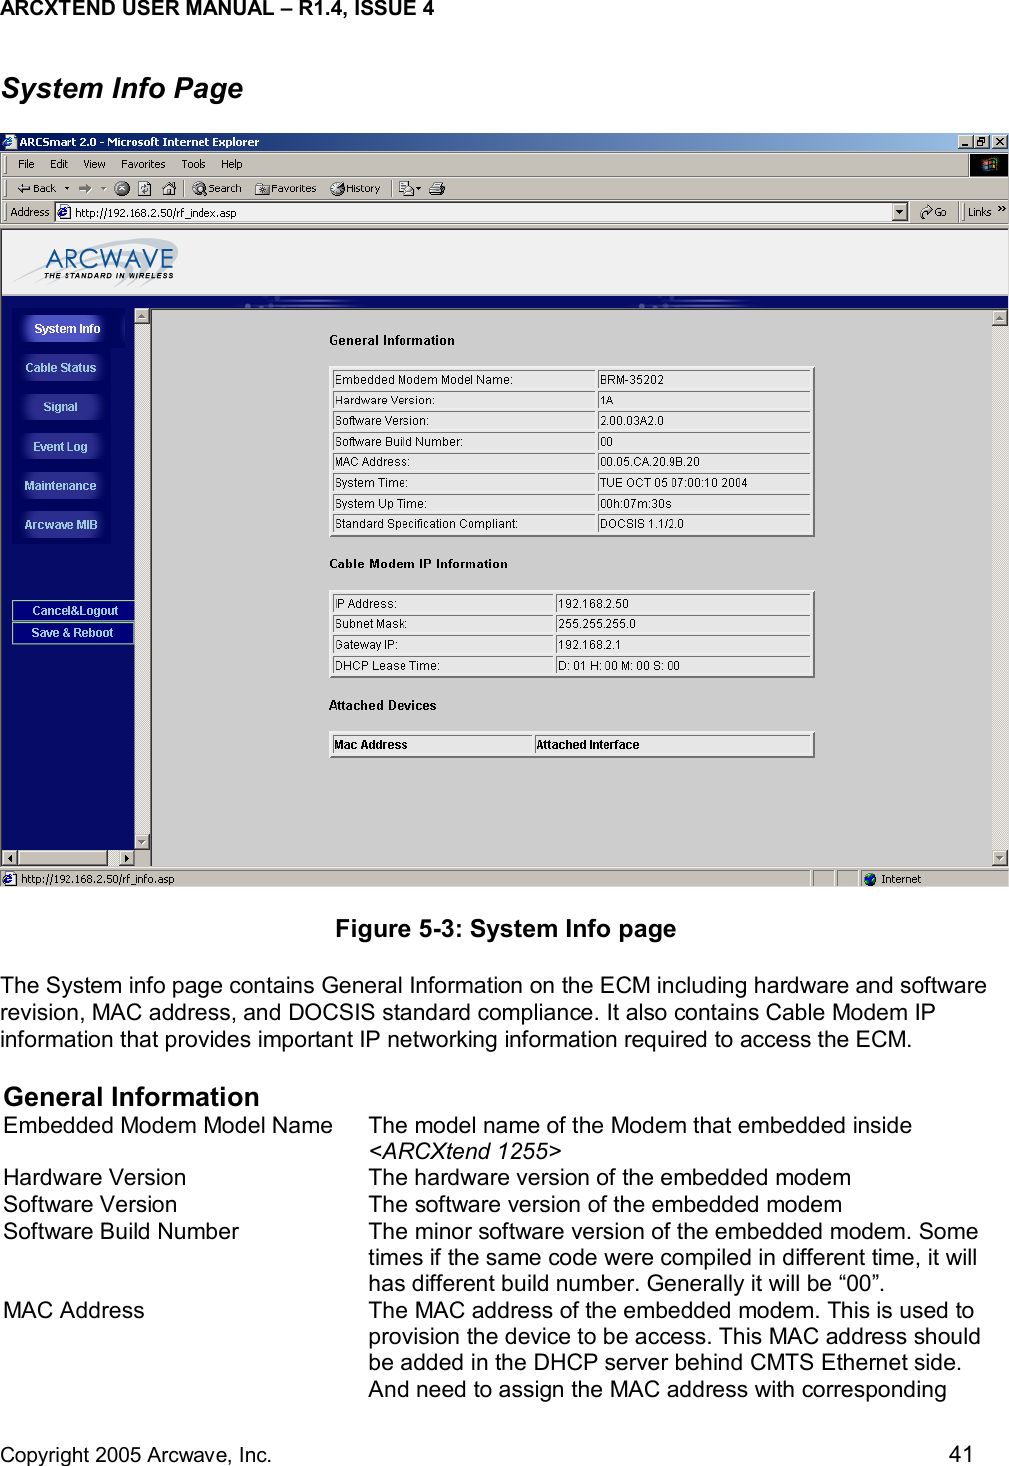 ARCXTEND USER MANUAL – R1.4, ISSUE 4  Copyright 2005 Arcwave, Inc.    41 System Info Page  Figure 5-3: System Info page The System info page contains General Information on the ECM including hardware and software revision, MAC address, and DOCSIS standard compliance. It also contains Cable Modem IP information that provides important IP networking information required to access the ECM.  General Information  Embedded Modem Model Name  The model name of the Modem that embedded inside &lt;ARCXtend 1255&gt; Hardware Version  The hardware version of the embedded modem Software Version  The software version of the embedded modem Software Build Number  The minor software version of the embedded modem. Some times if the same code were compiled in different time, it will has different build number. Generally it will be “00”. MAC Address  The MAC address of the embedded modem. This is used to provision the device to be access. This MAC address should be added in the DHCP server behind CMTS Ethernet side. And need to assign the MAC address with corresponding 